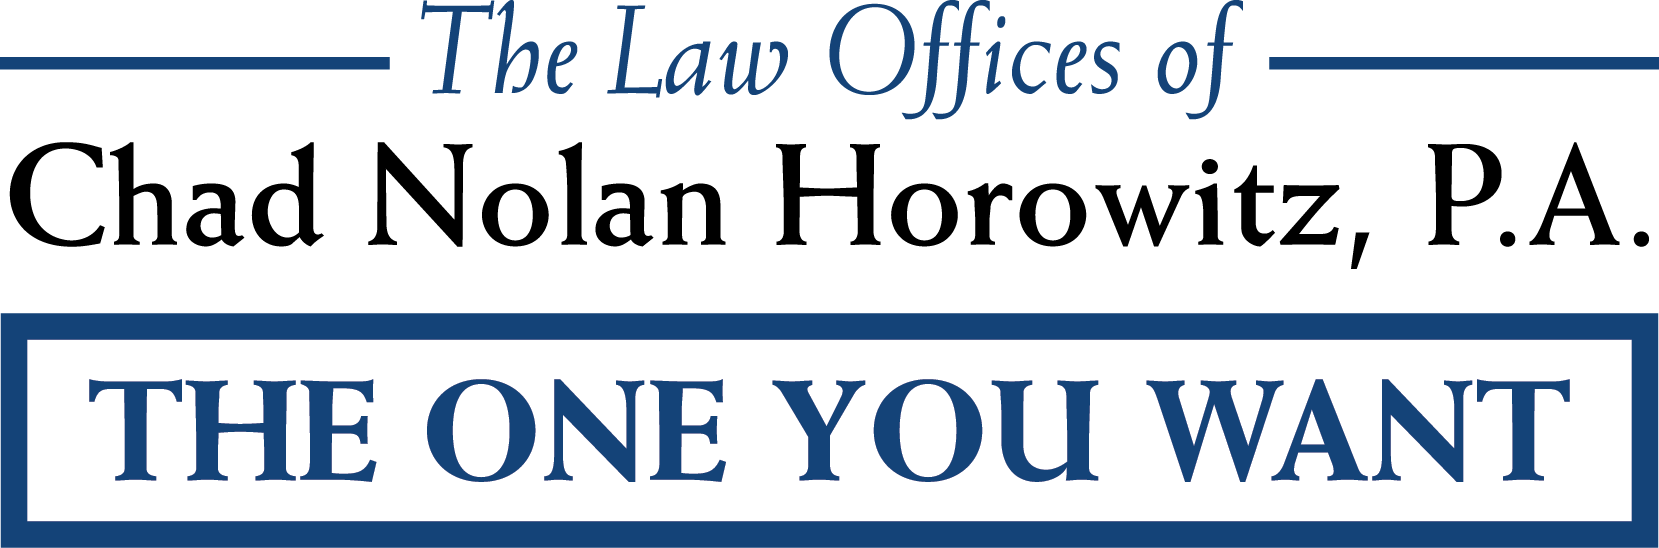 The Law Offices of Chad Nolan Horowitz, P.A. Shares the Tips for Getting Justice